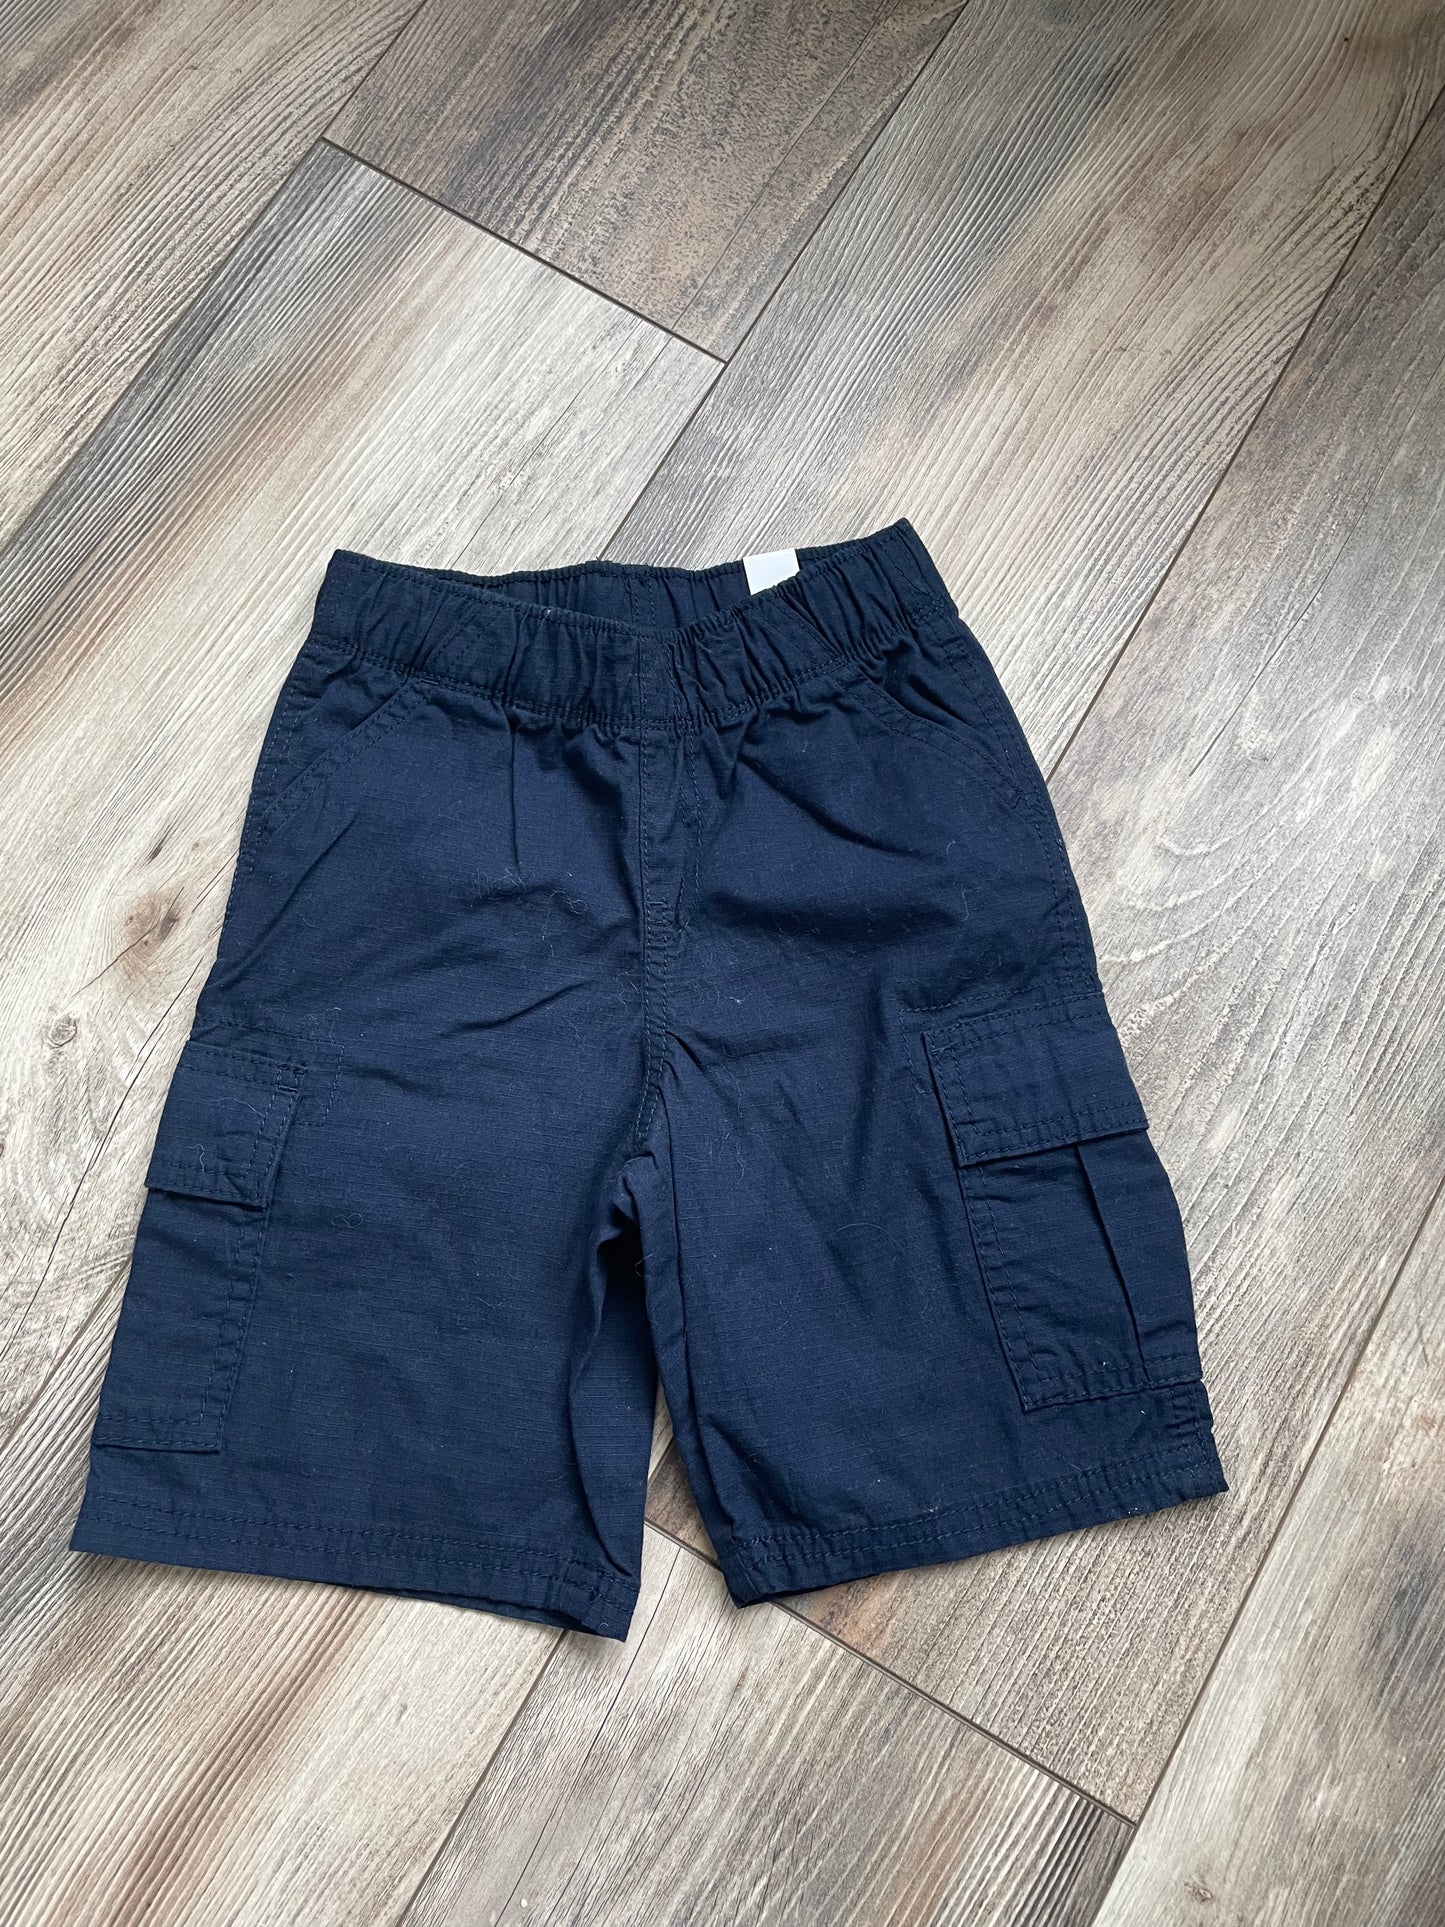 NWT - 4T Childrens Place Shorts